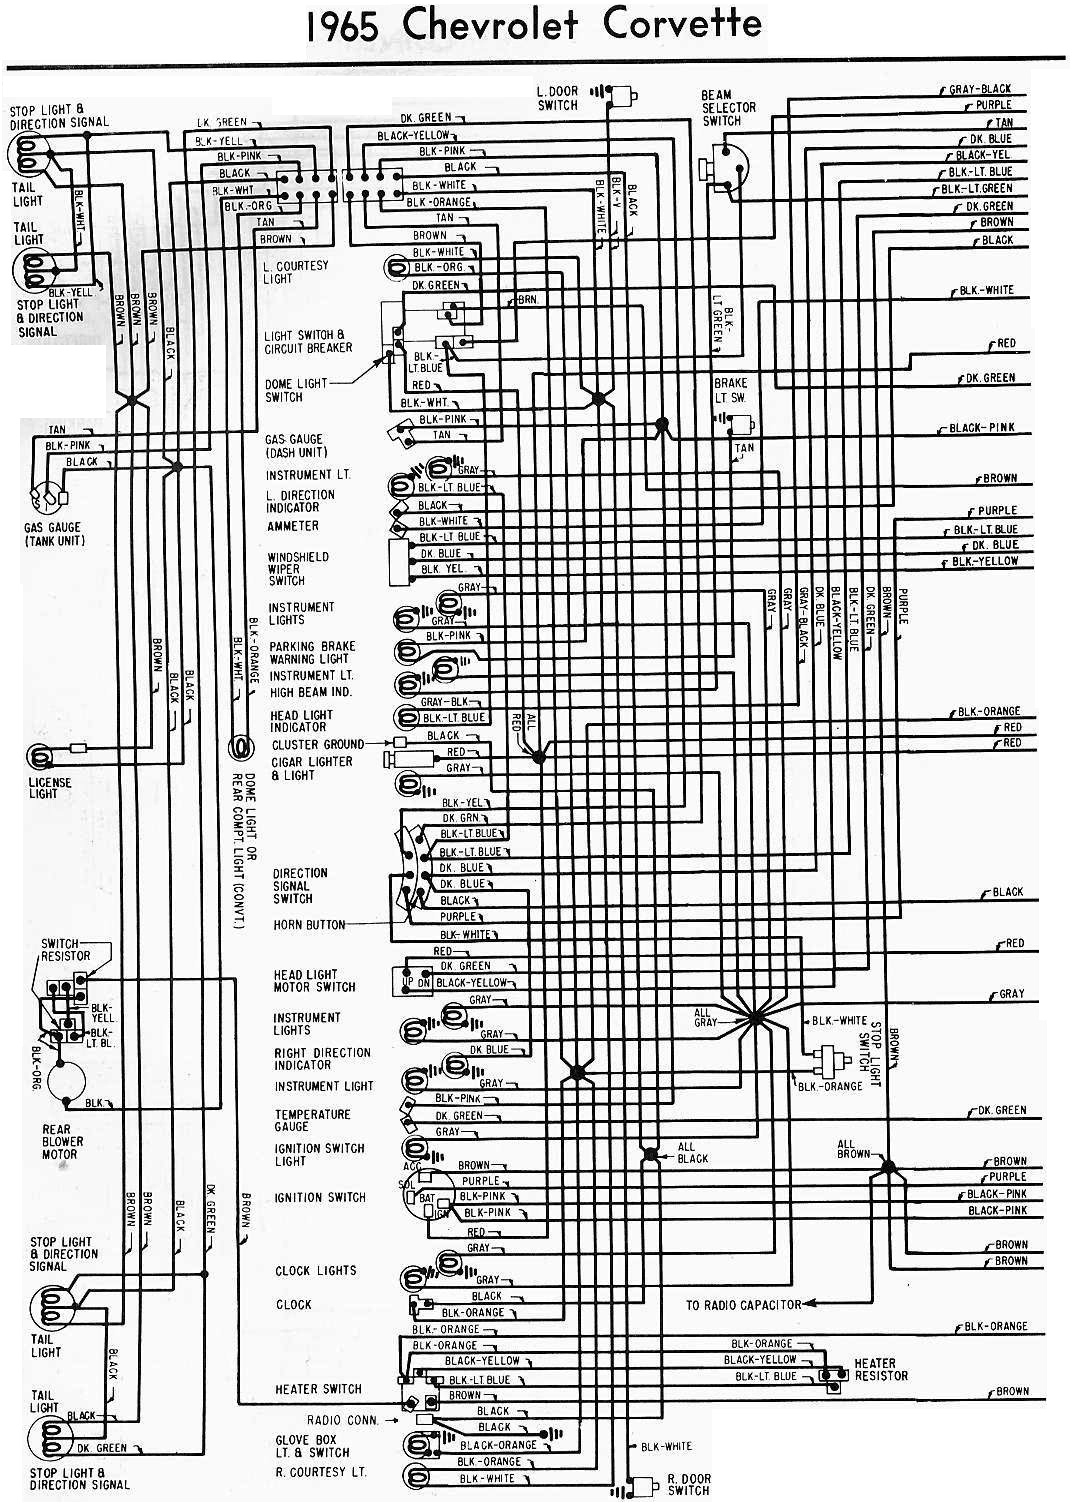 1965 Chevrolet Corvette Wiring Diagram | All about Wiring Diagrams